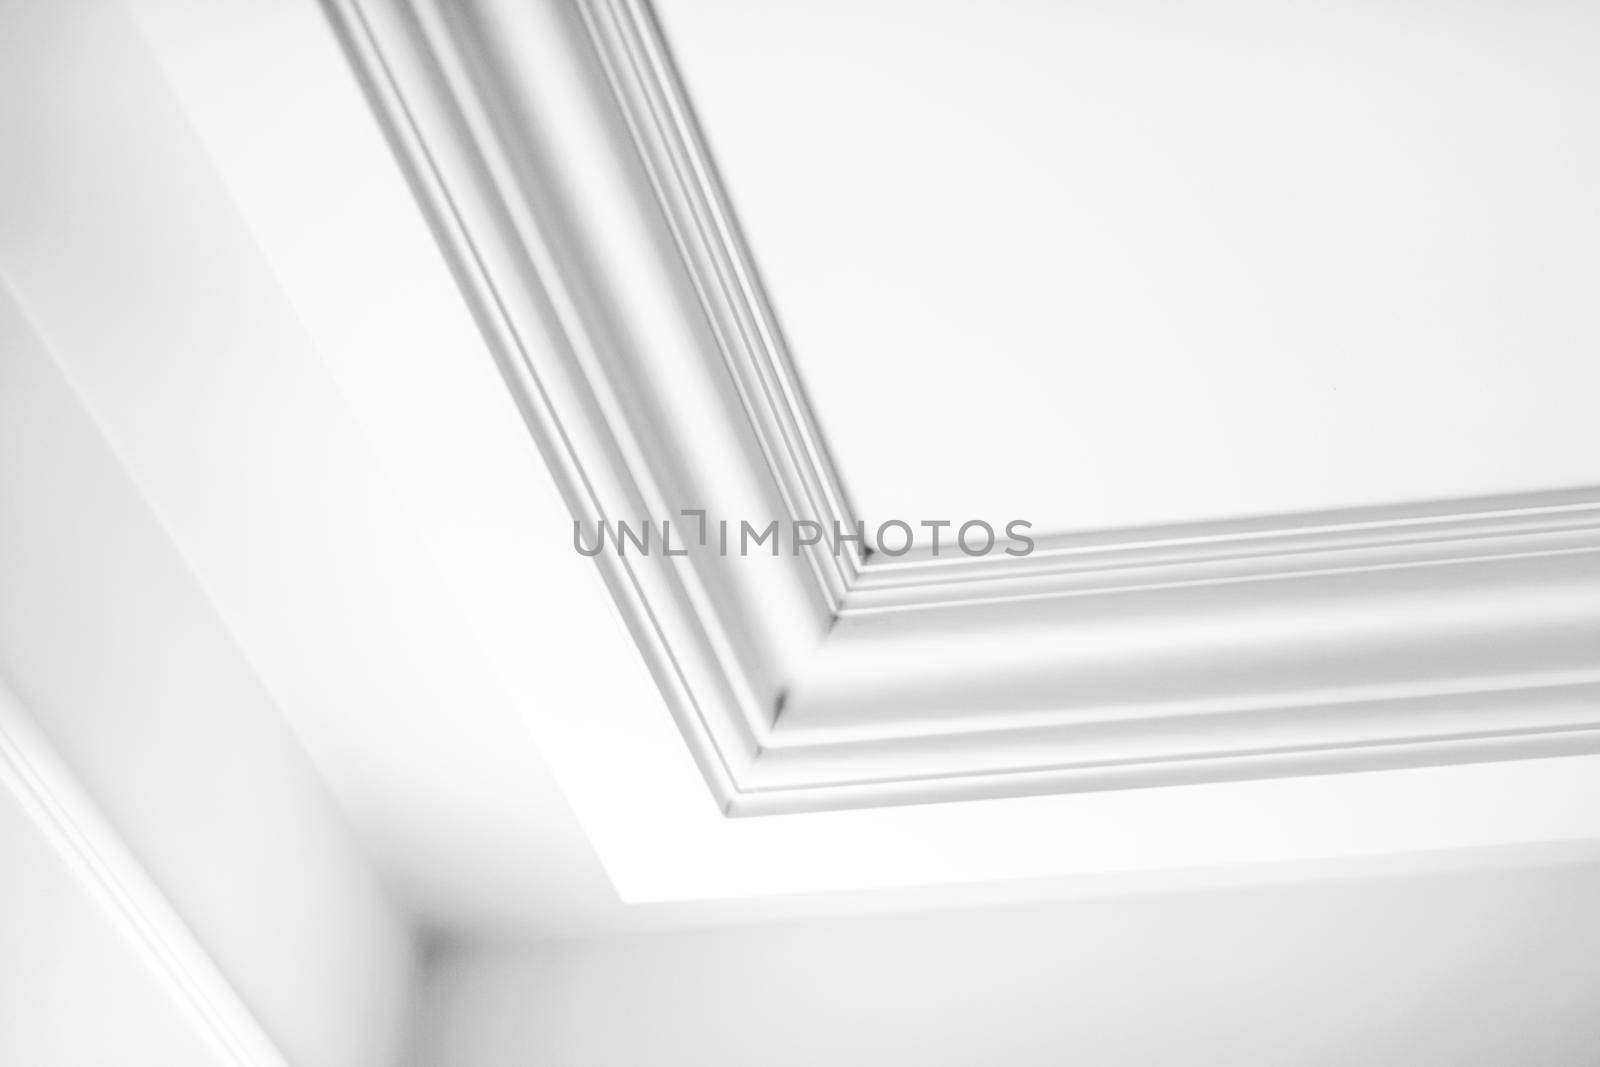 Molding on ceiling detail, interior design and architectural abstract background by Anneleven